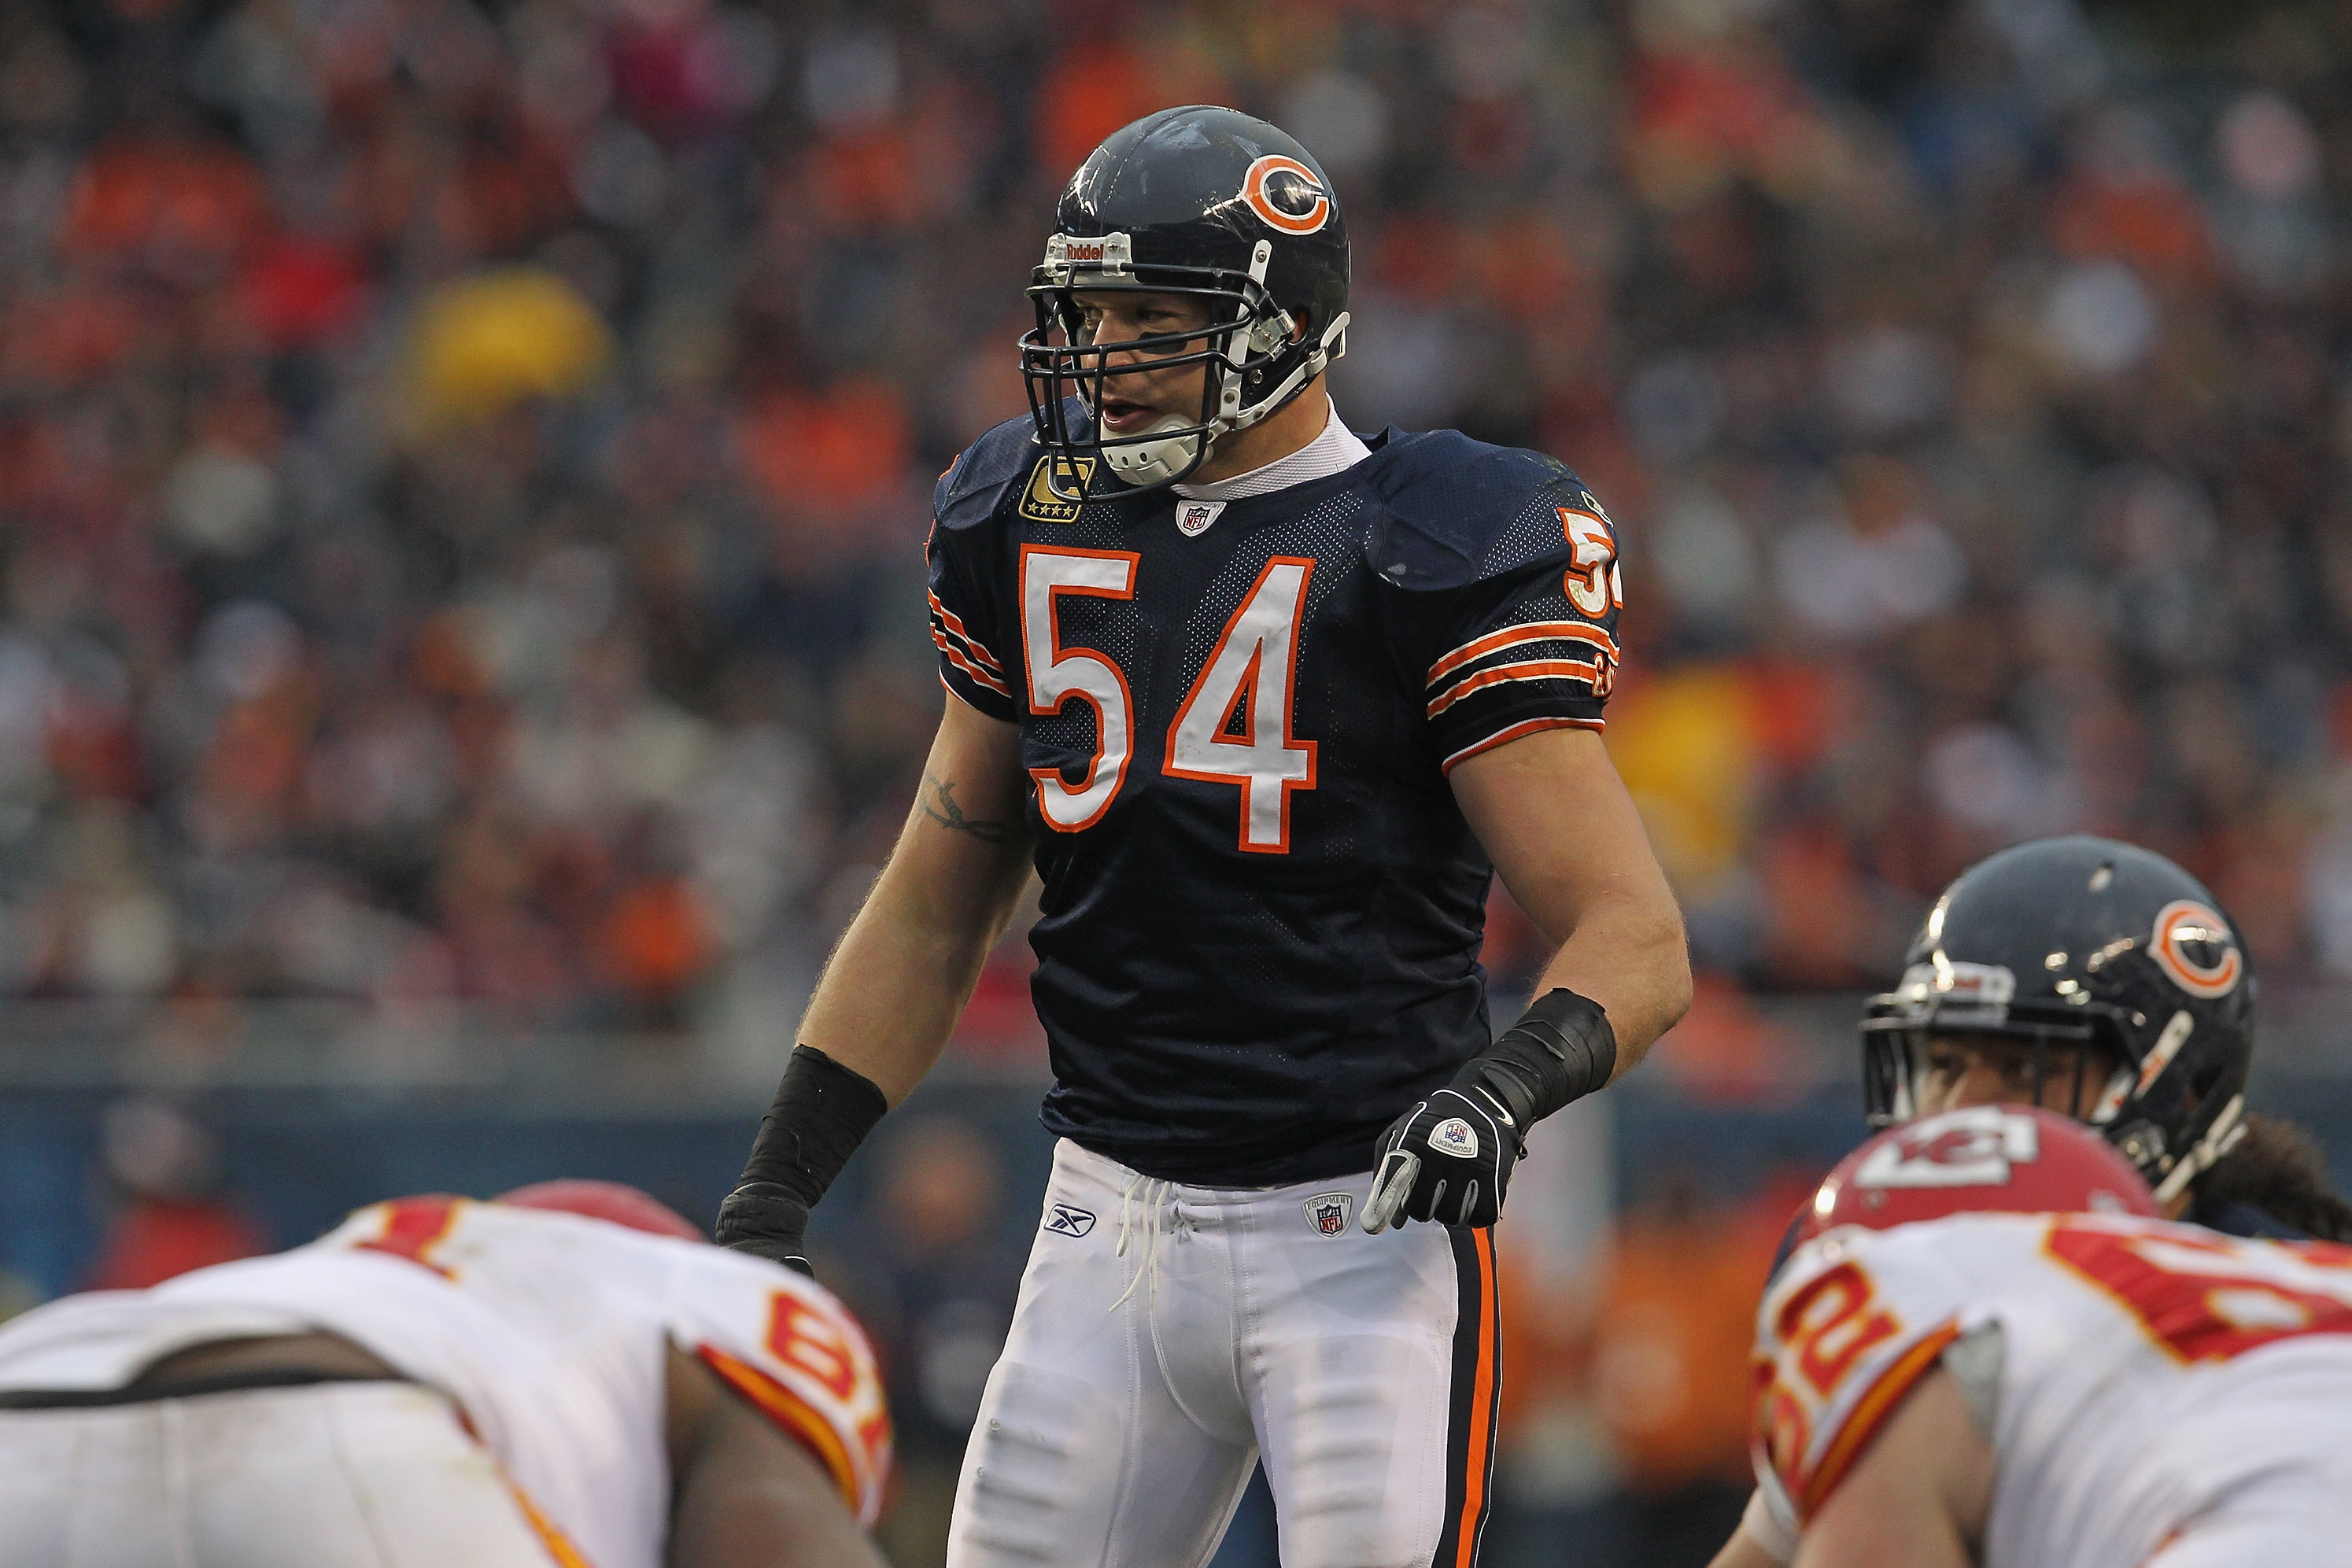 Brian Urlacher Wise to Say He May Test Free Agency After 2012